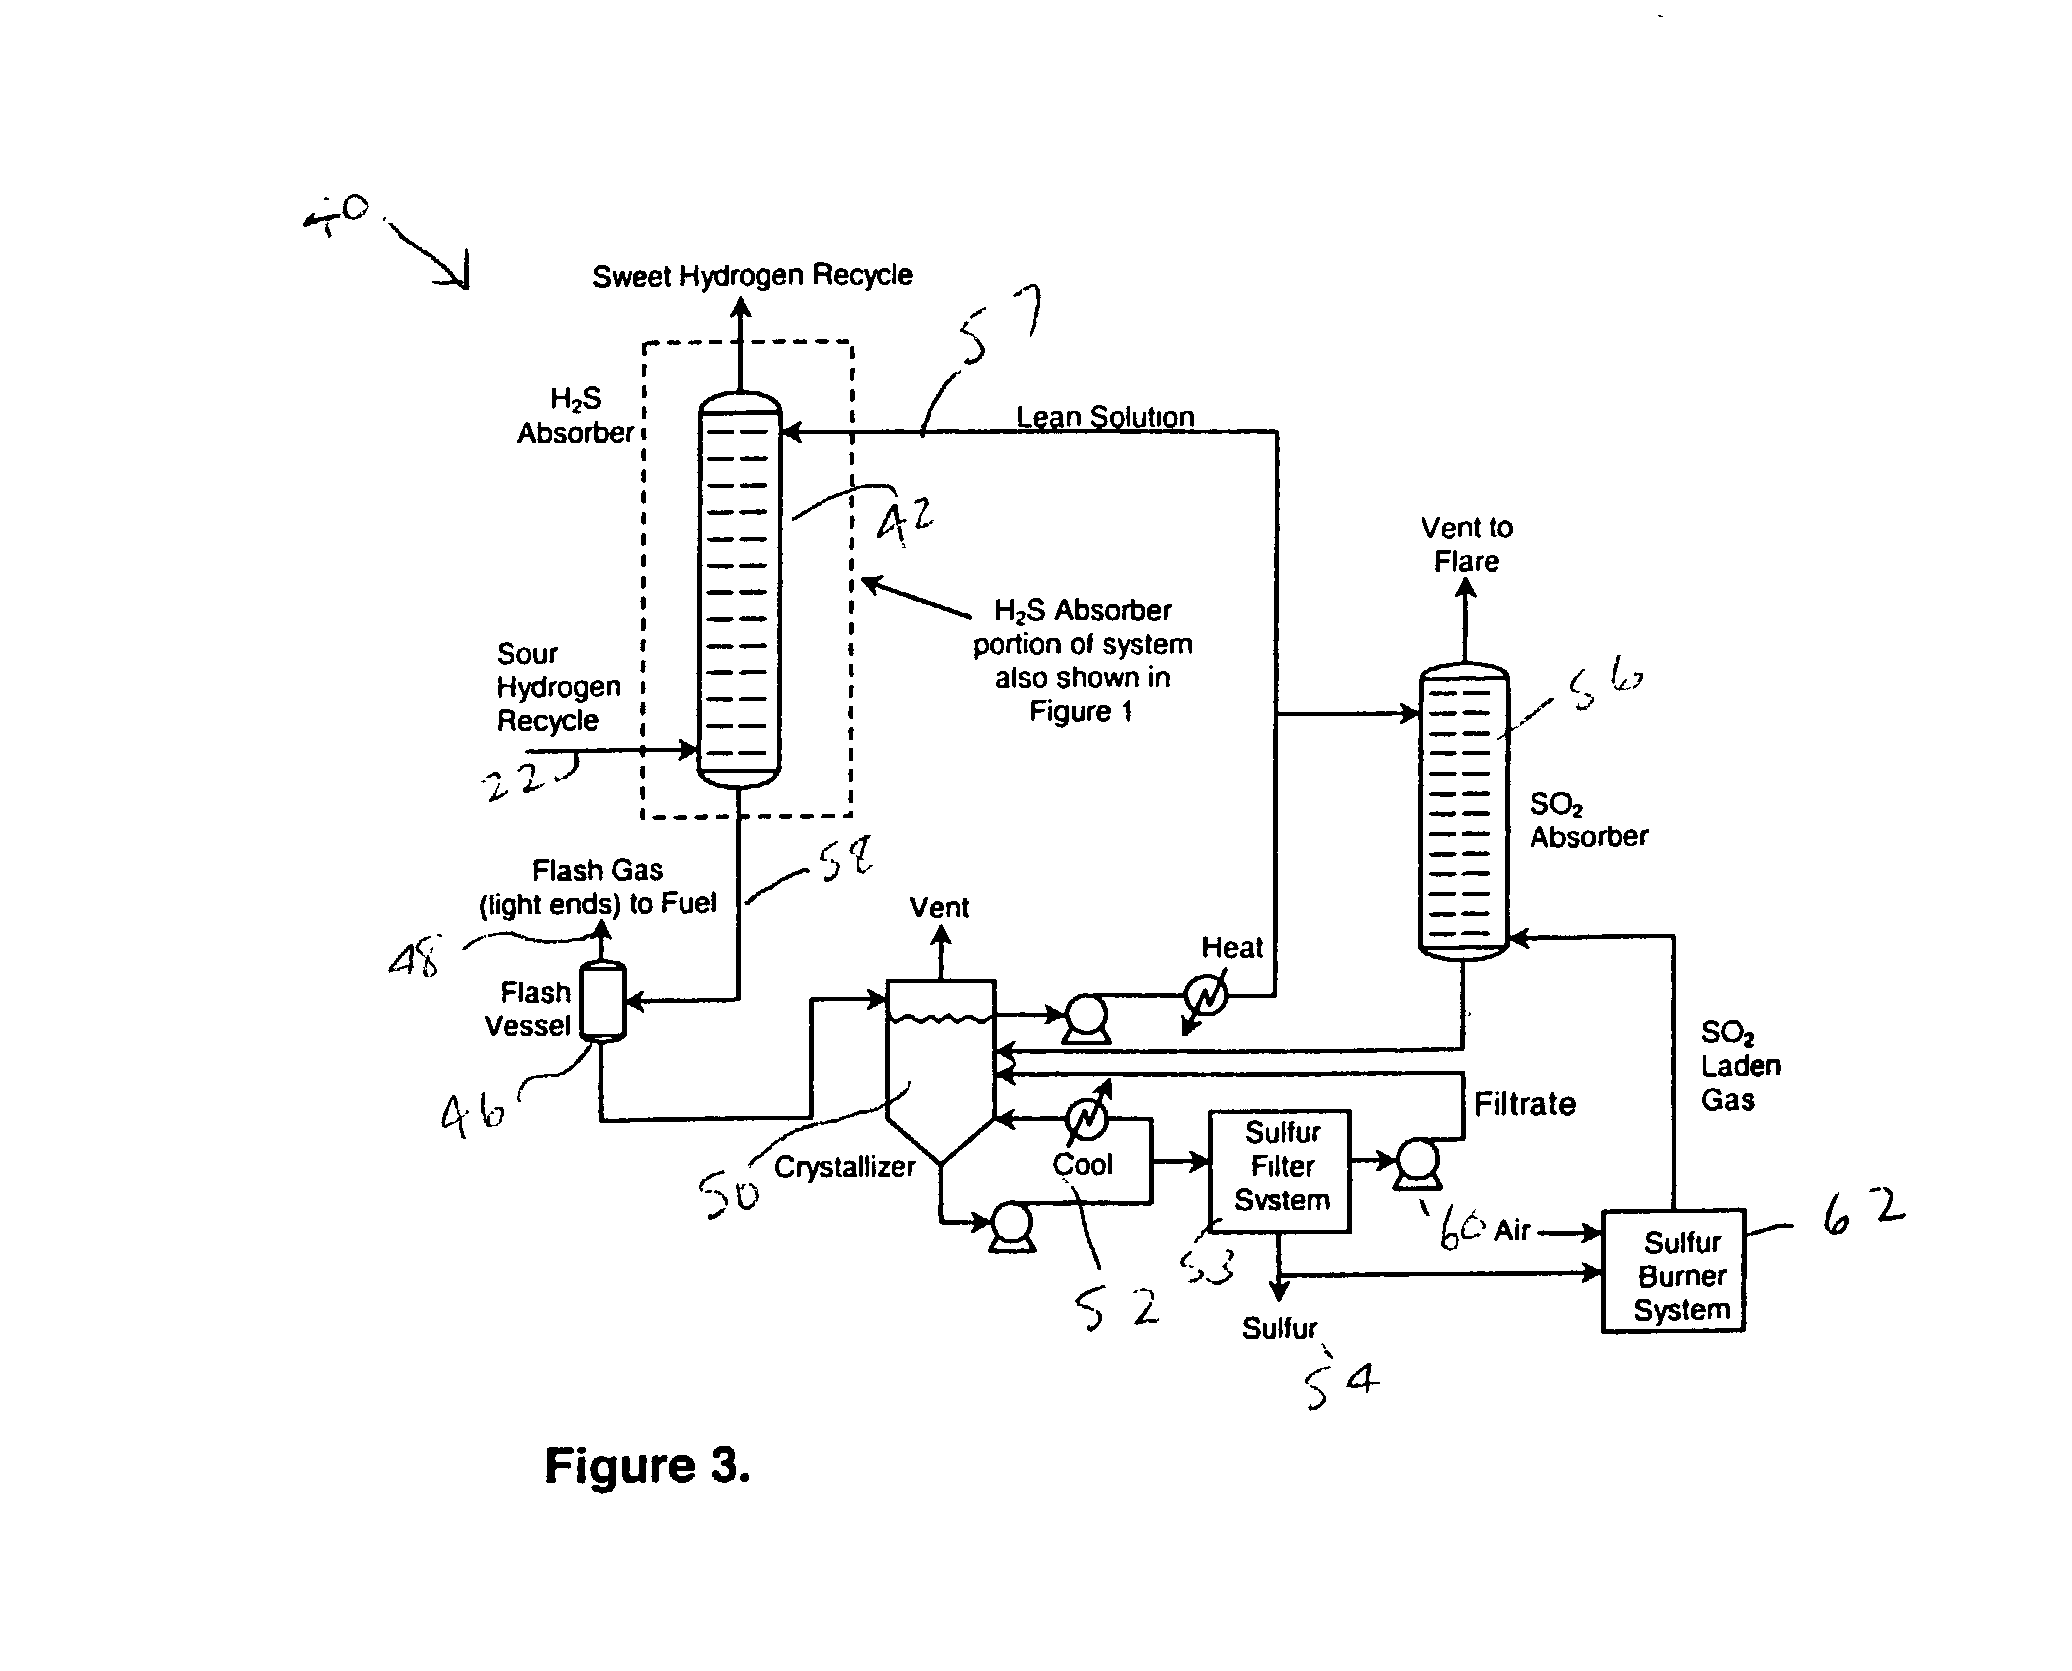 Process for recovering sulfur while sponging light hydrocarbons from hydrodesulfurization hydrogen recycle streams